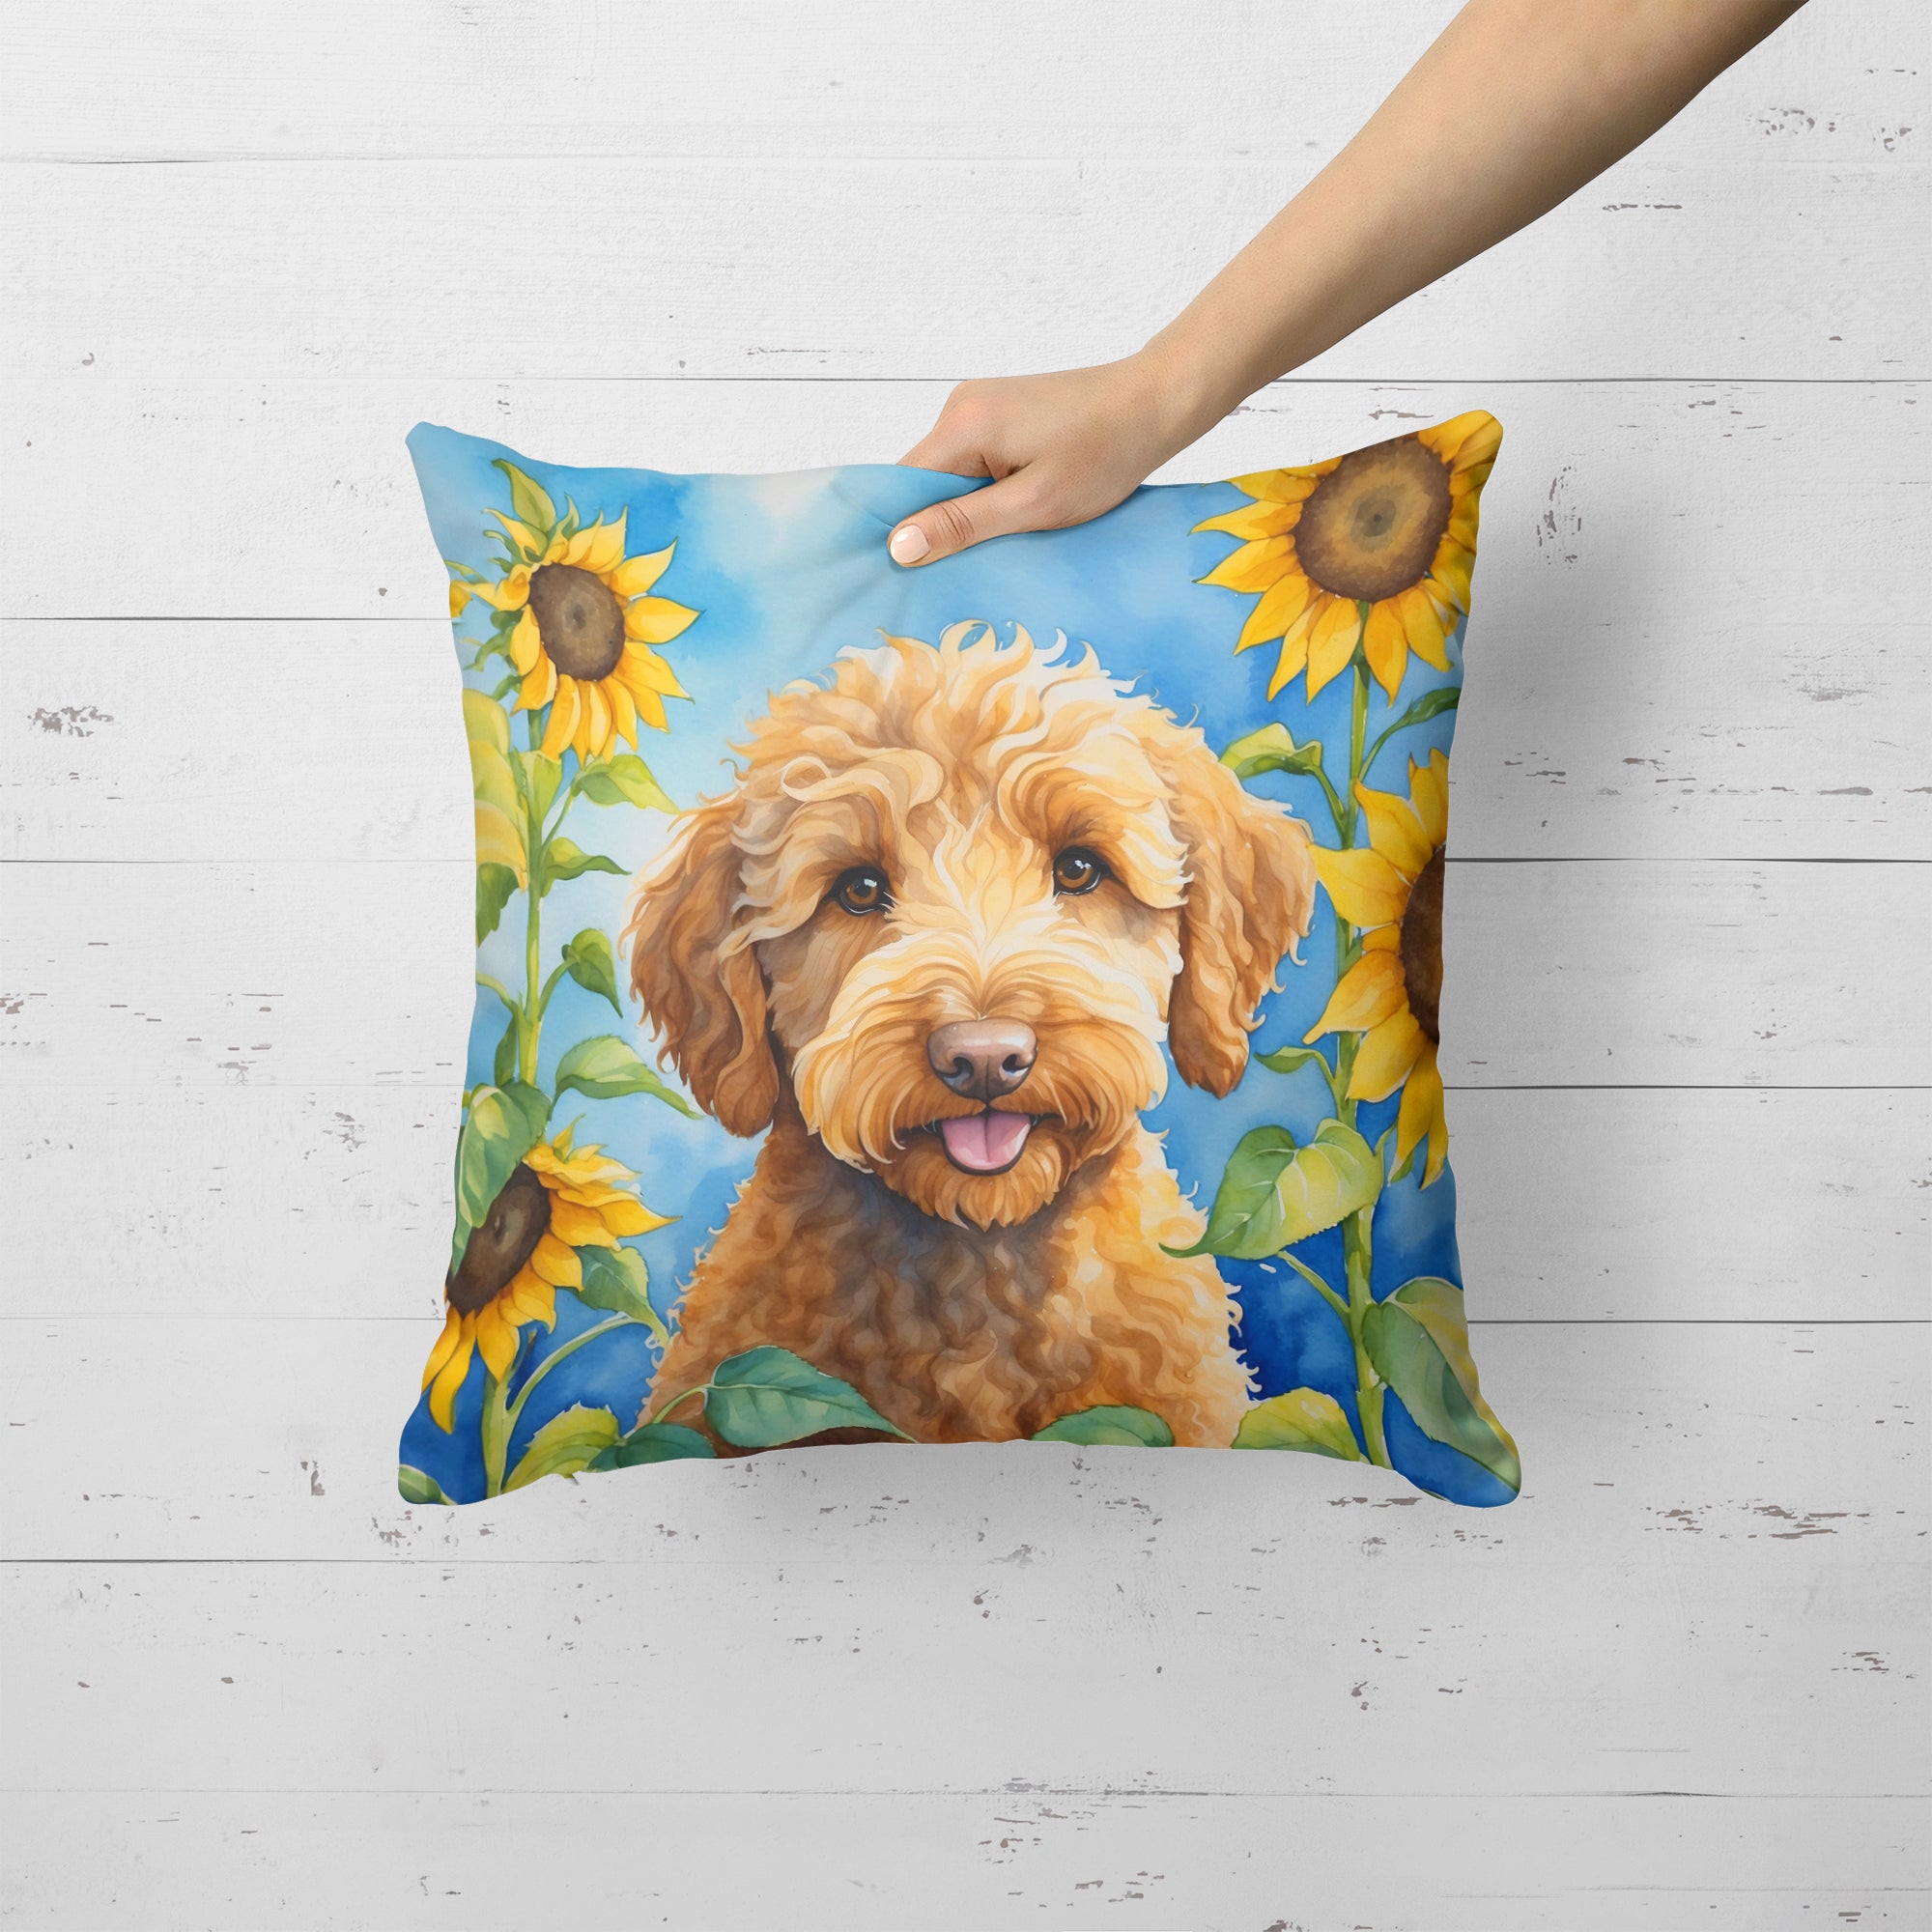 Buy this Labradoodle in Sunflowers Throw Pillow